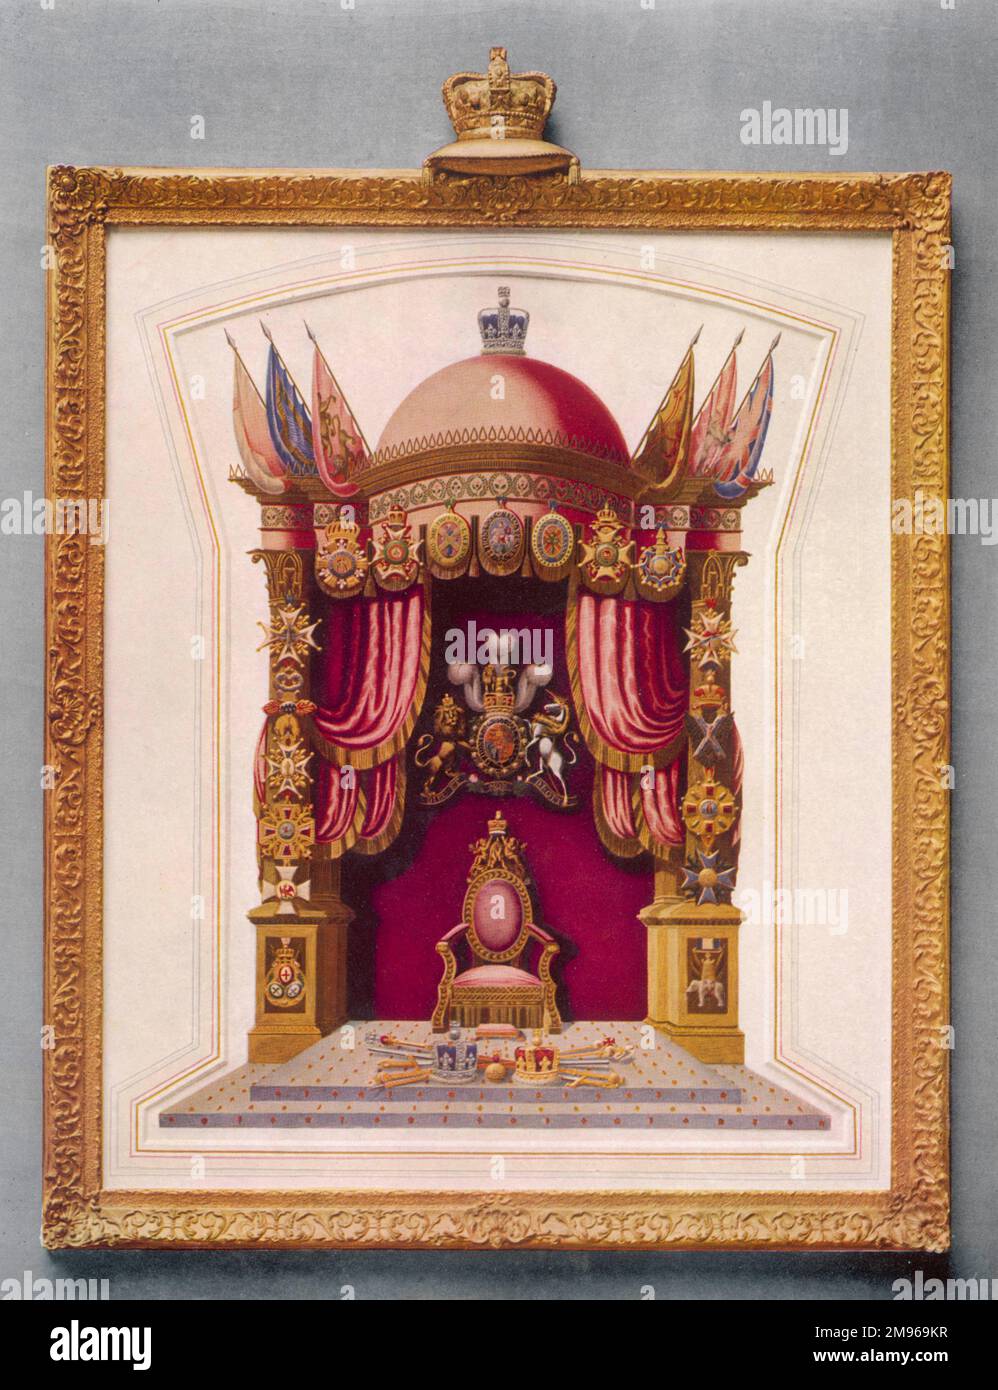 The throne of King George IV by T. Dowse, 'inventor of the burnished raised gold and silver in imitation of the ancient missal' presented in a gilt frame. Stock Photo